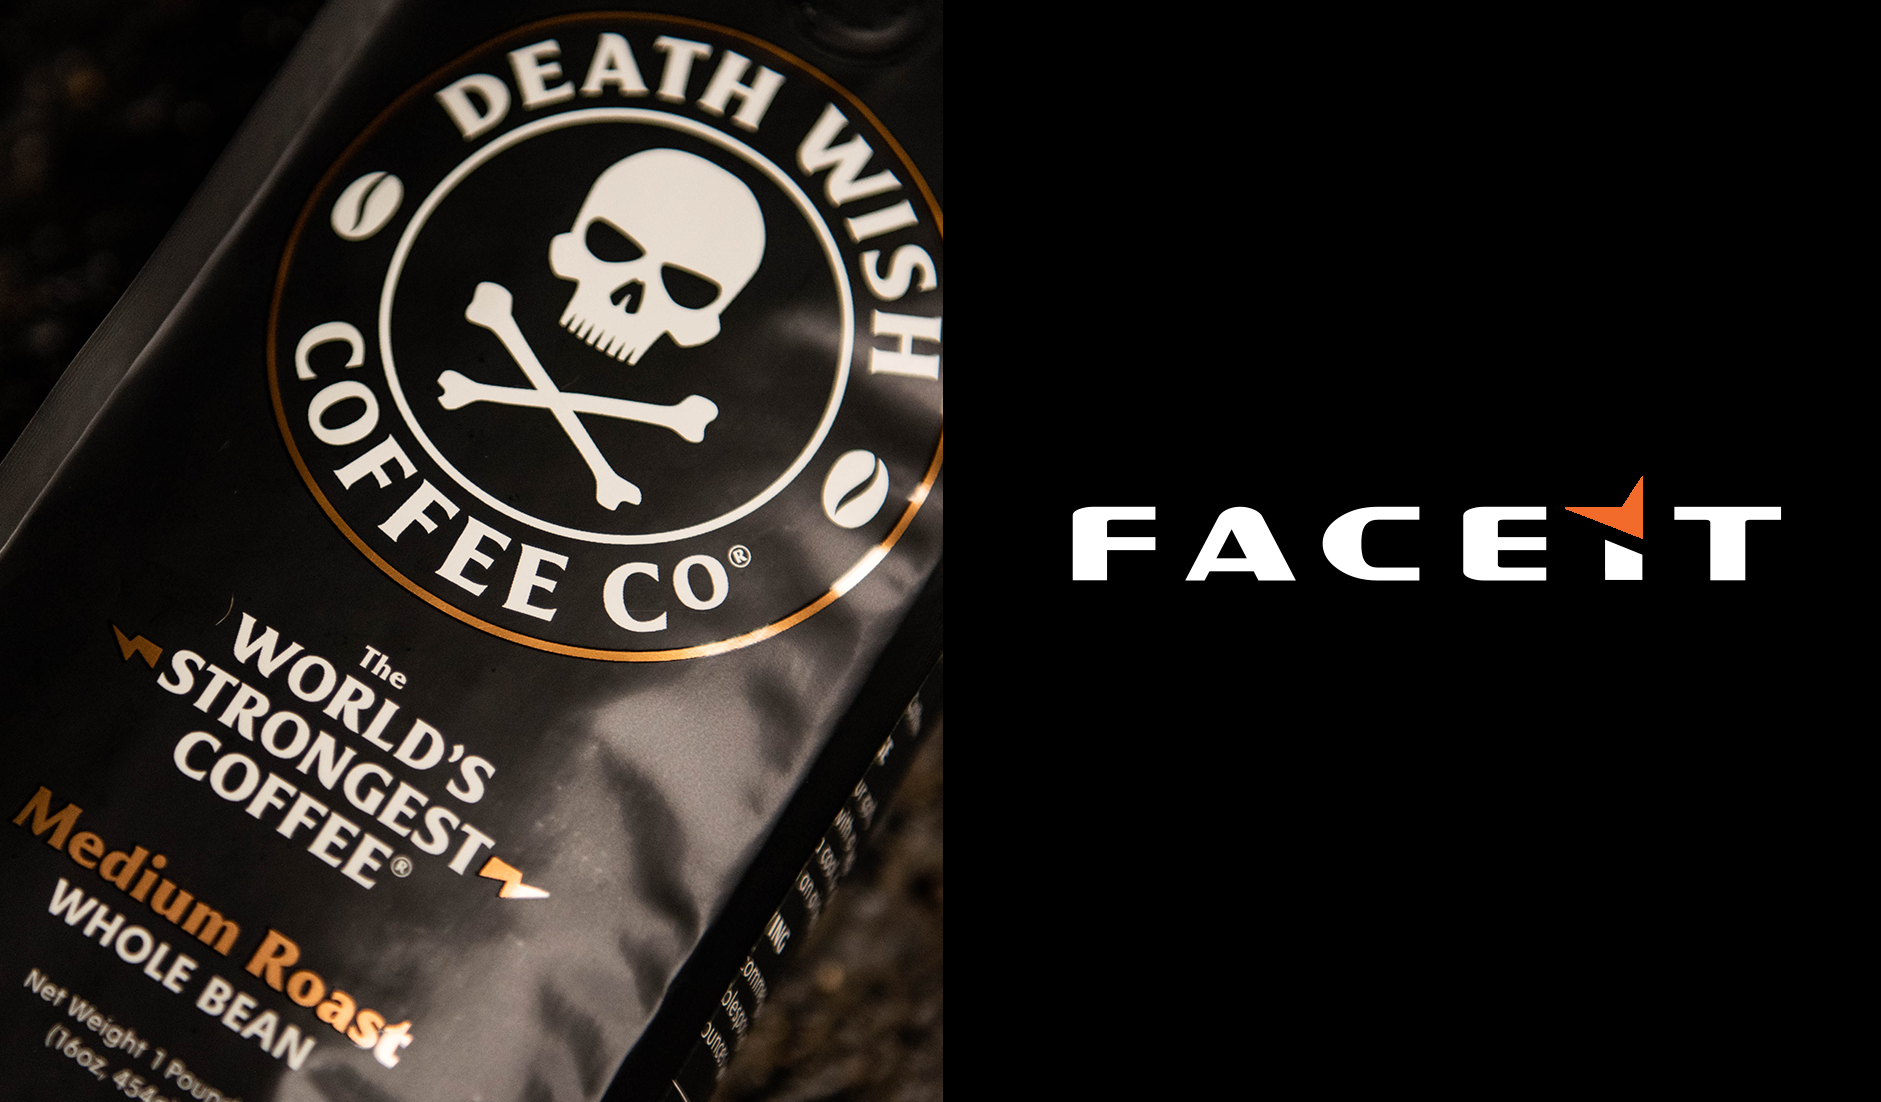 coffee grounds insect repellent - Death Wish Coffee Company   LinkedIn